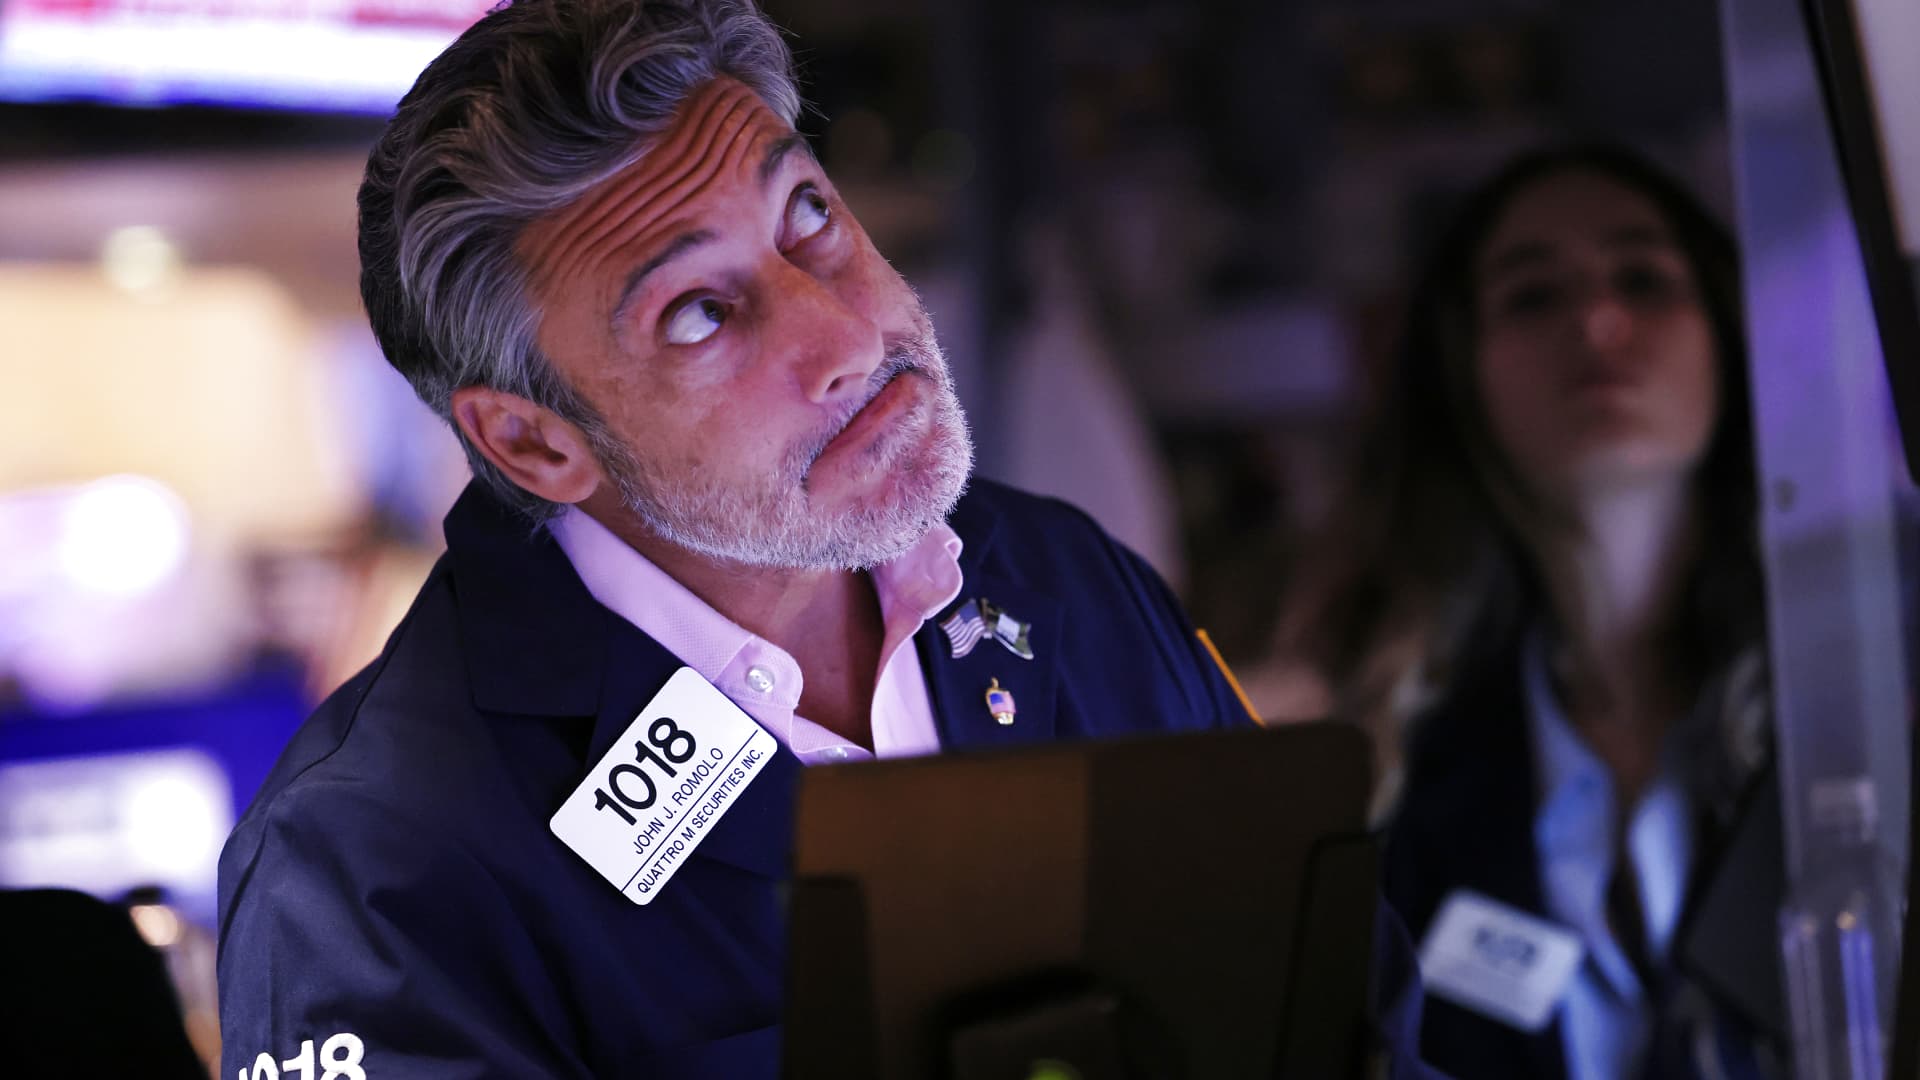 5 things to know before the stock market opens Friday